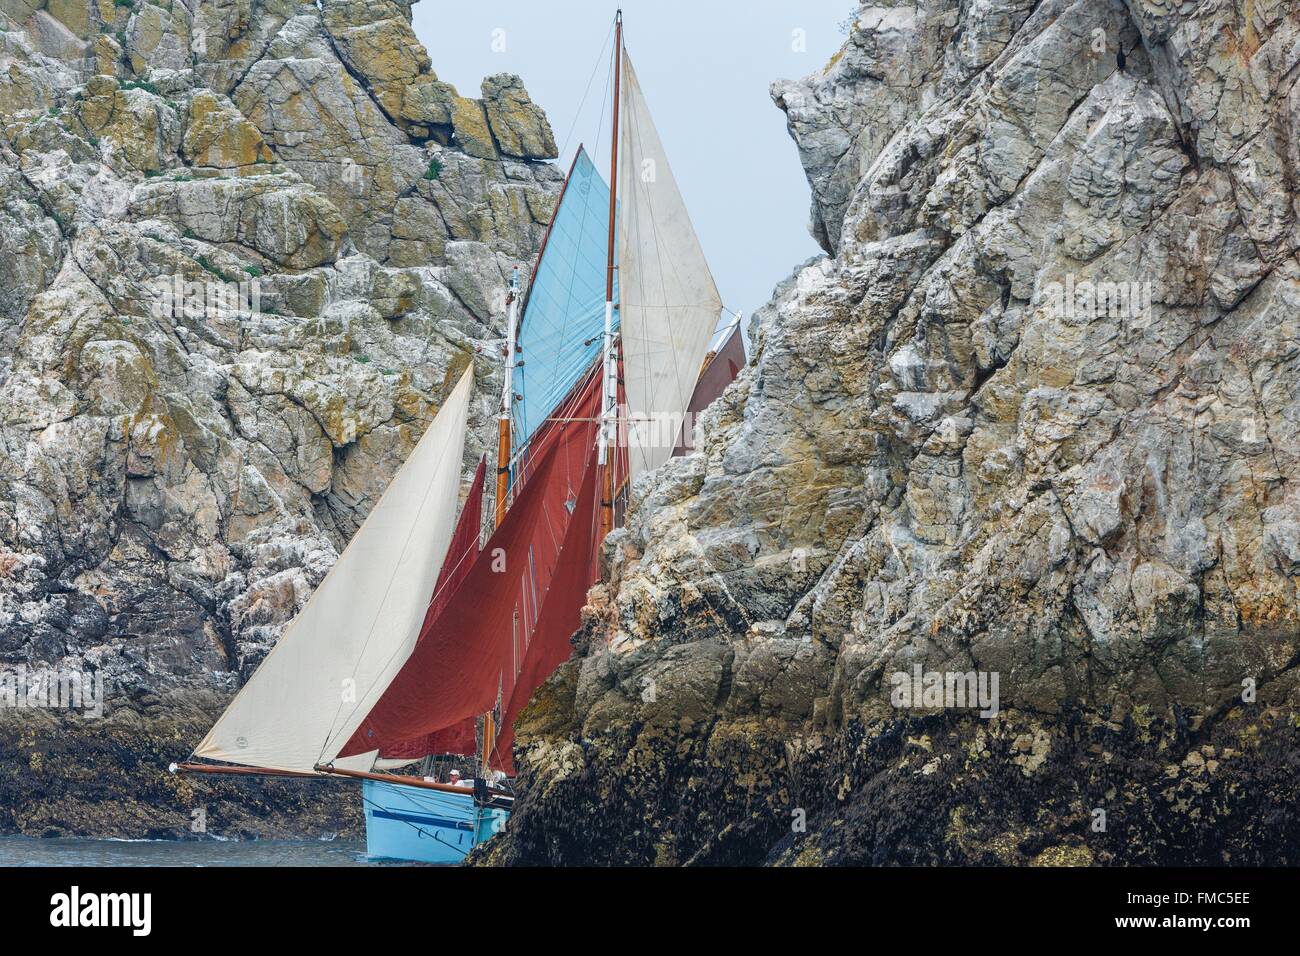 France, Finistere, Douarnenez, Appearance of a gaff cutter or sloop in a pass between two rocks Stock Photo